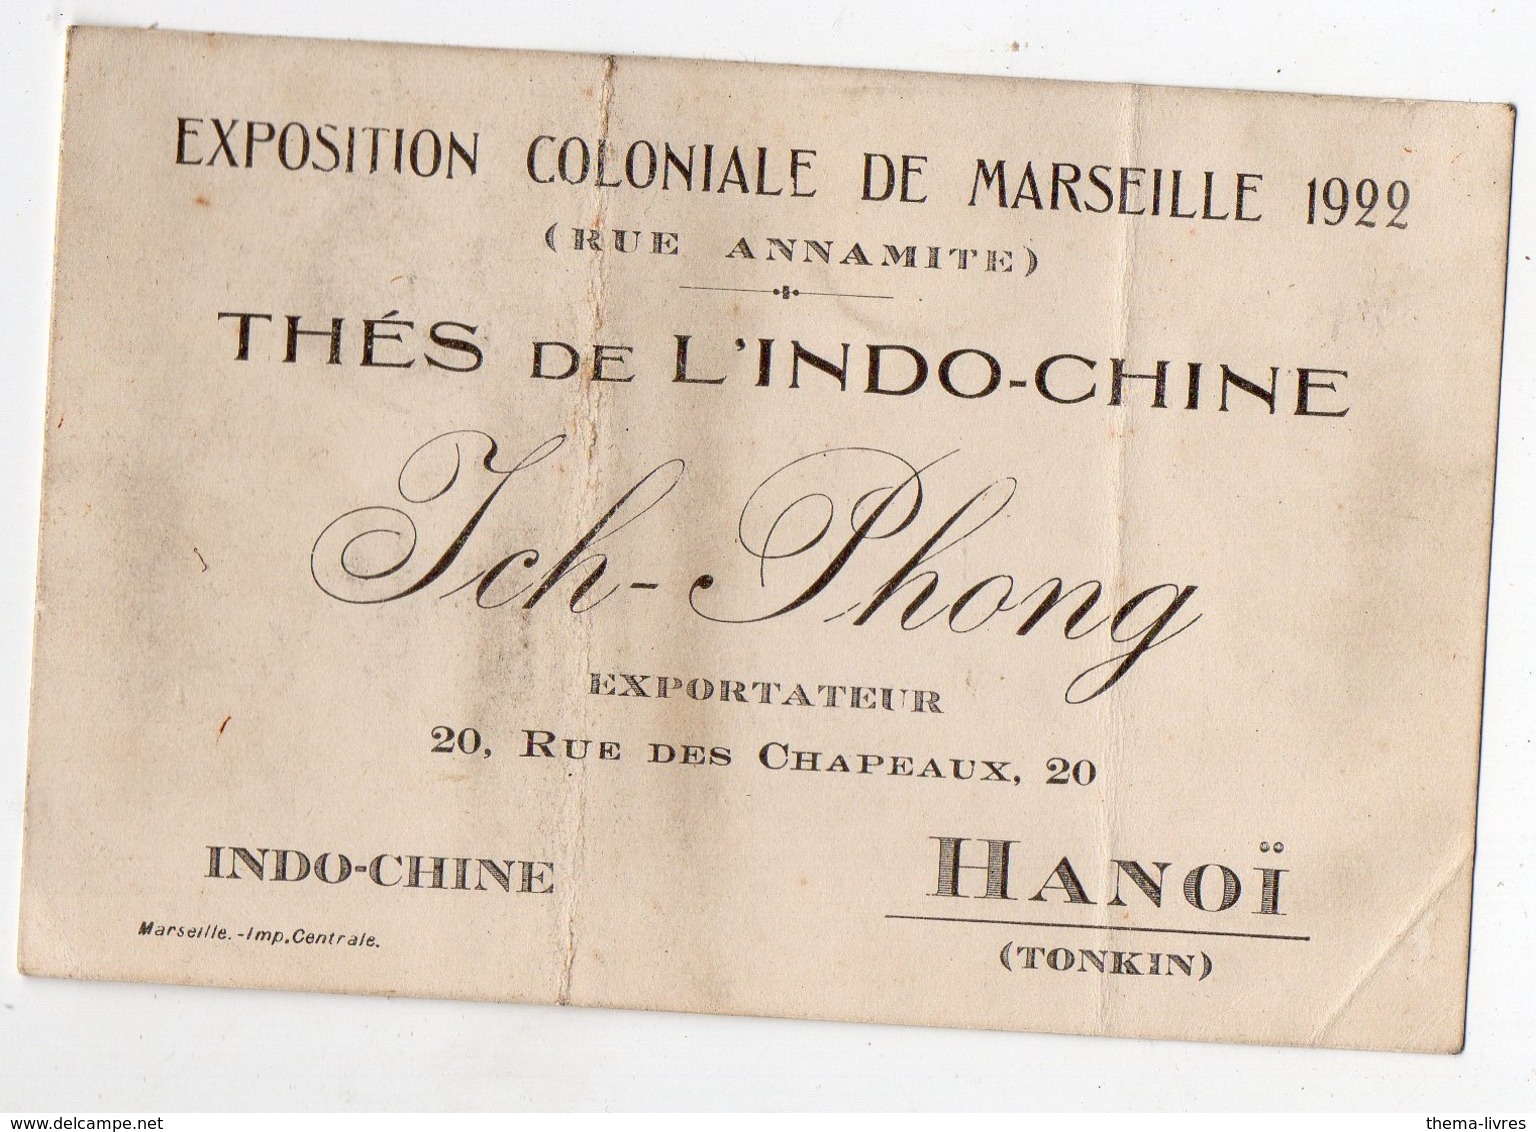 Hanoï (Tonkin)  Carte THE DE L'INDOCHINE  Ich-Phong   (EXPO COLONIALE MARSEILLE 1922) (PPP16981) - Advertising